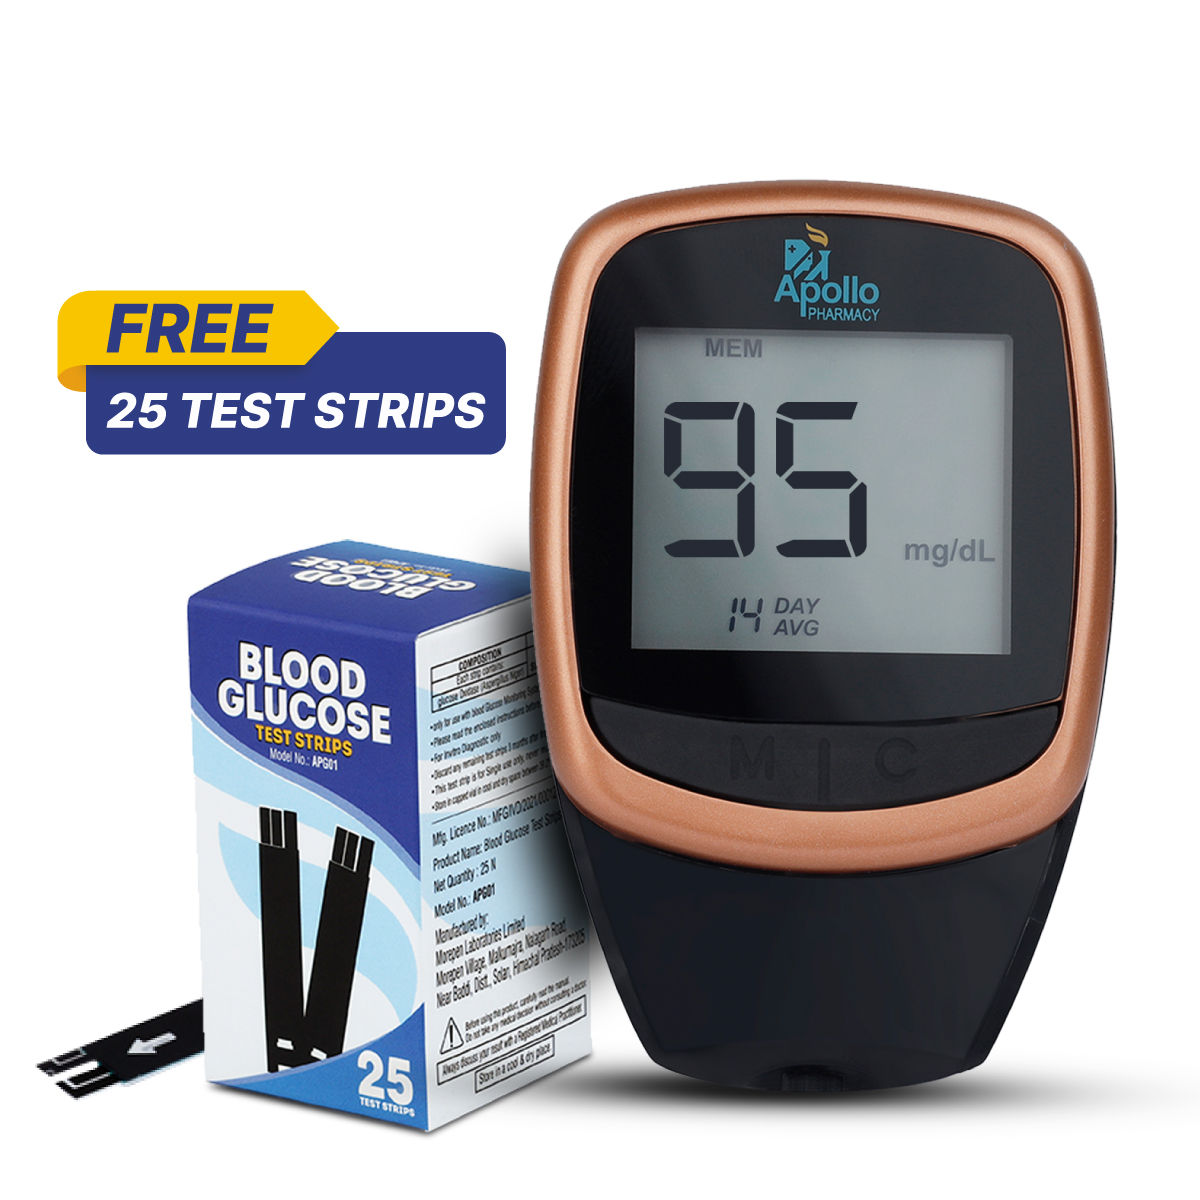 Buy Apollo Pharmacy Smart Blood Glucose Monitoring Bluetooth System with Diabetes Management App, APG-01 + 25 Test Strips, 1 kit Online